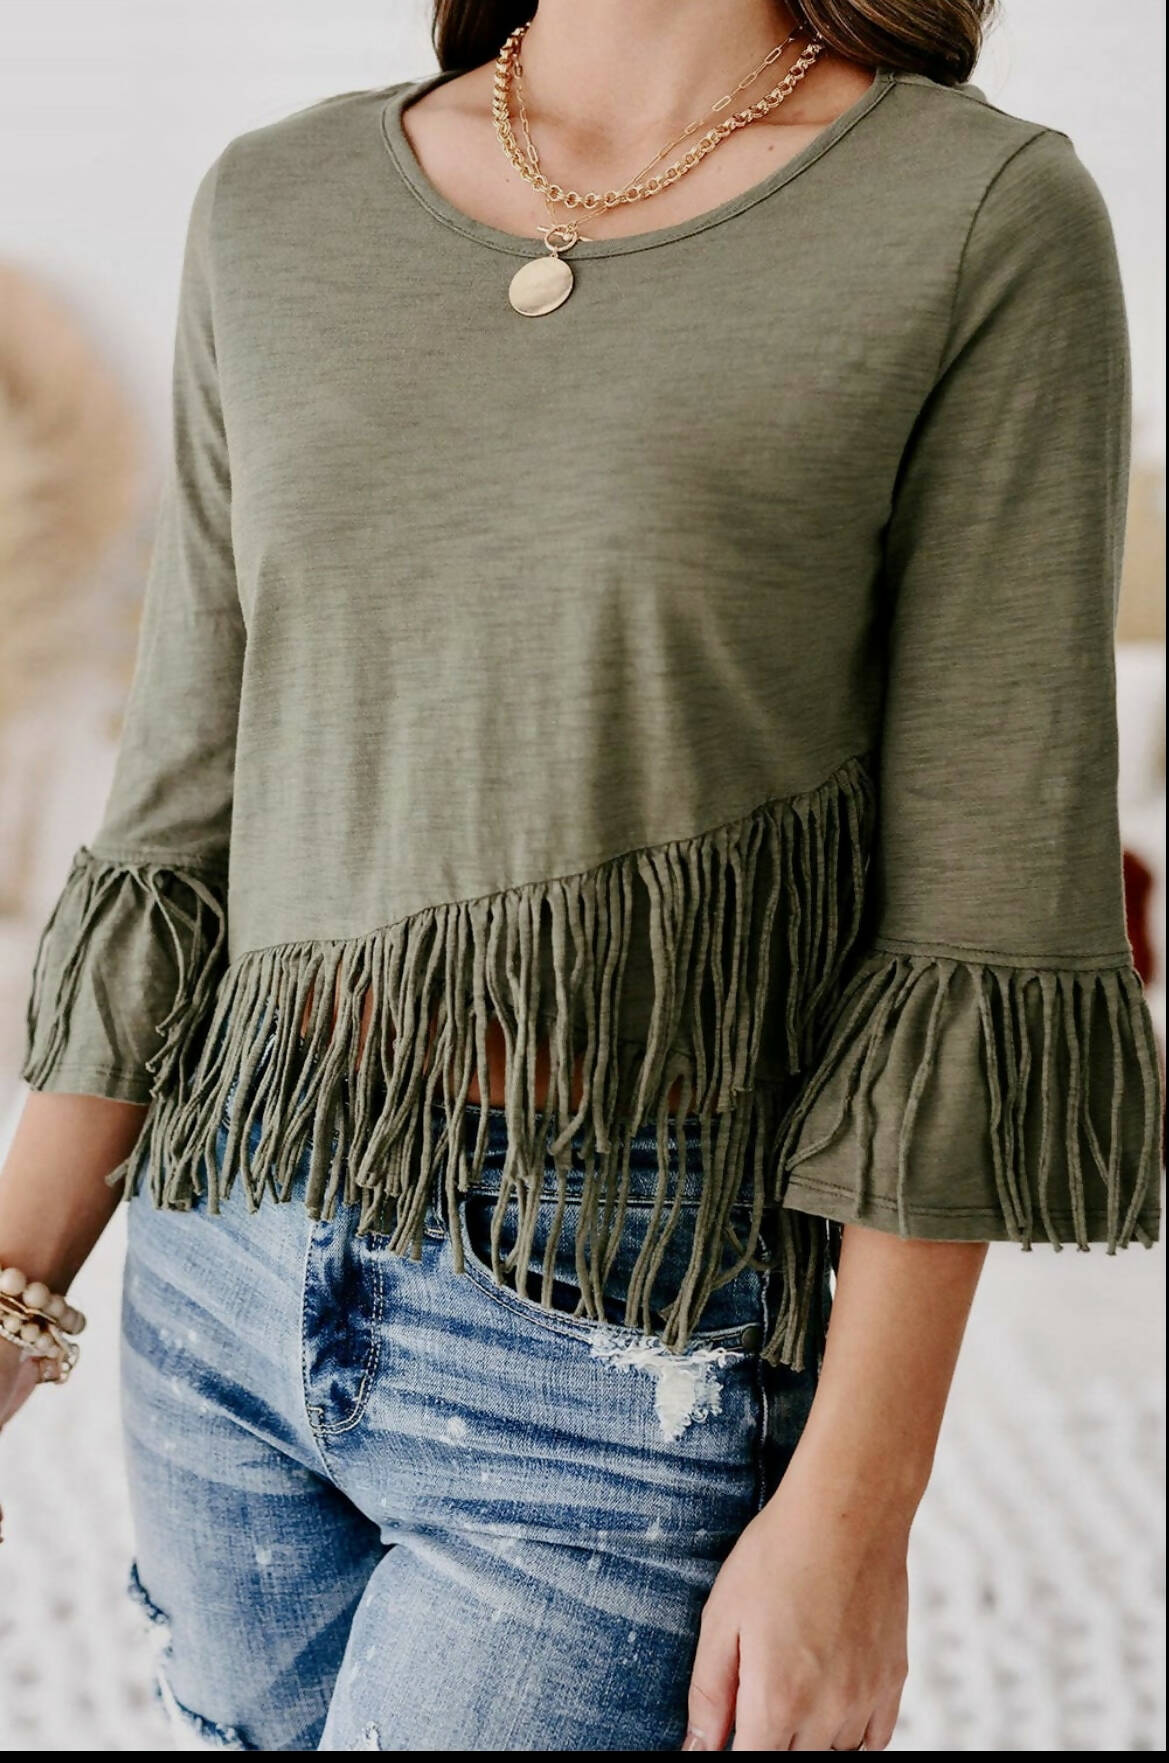 Judith Fringe Crop Top-Short Sleeves-Vintage Cowgirl-Deadwood South Boutique, Women's Fashion Boutique in Henderson, TX